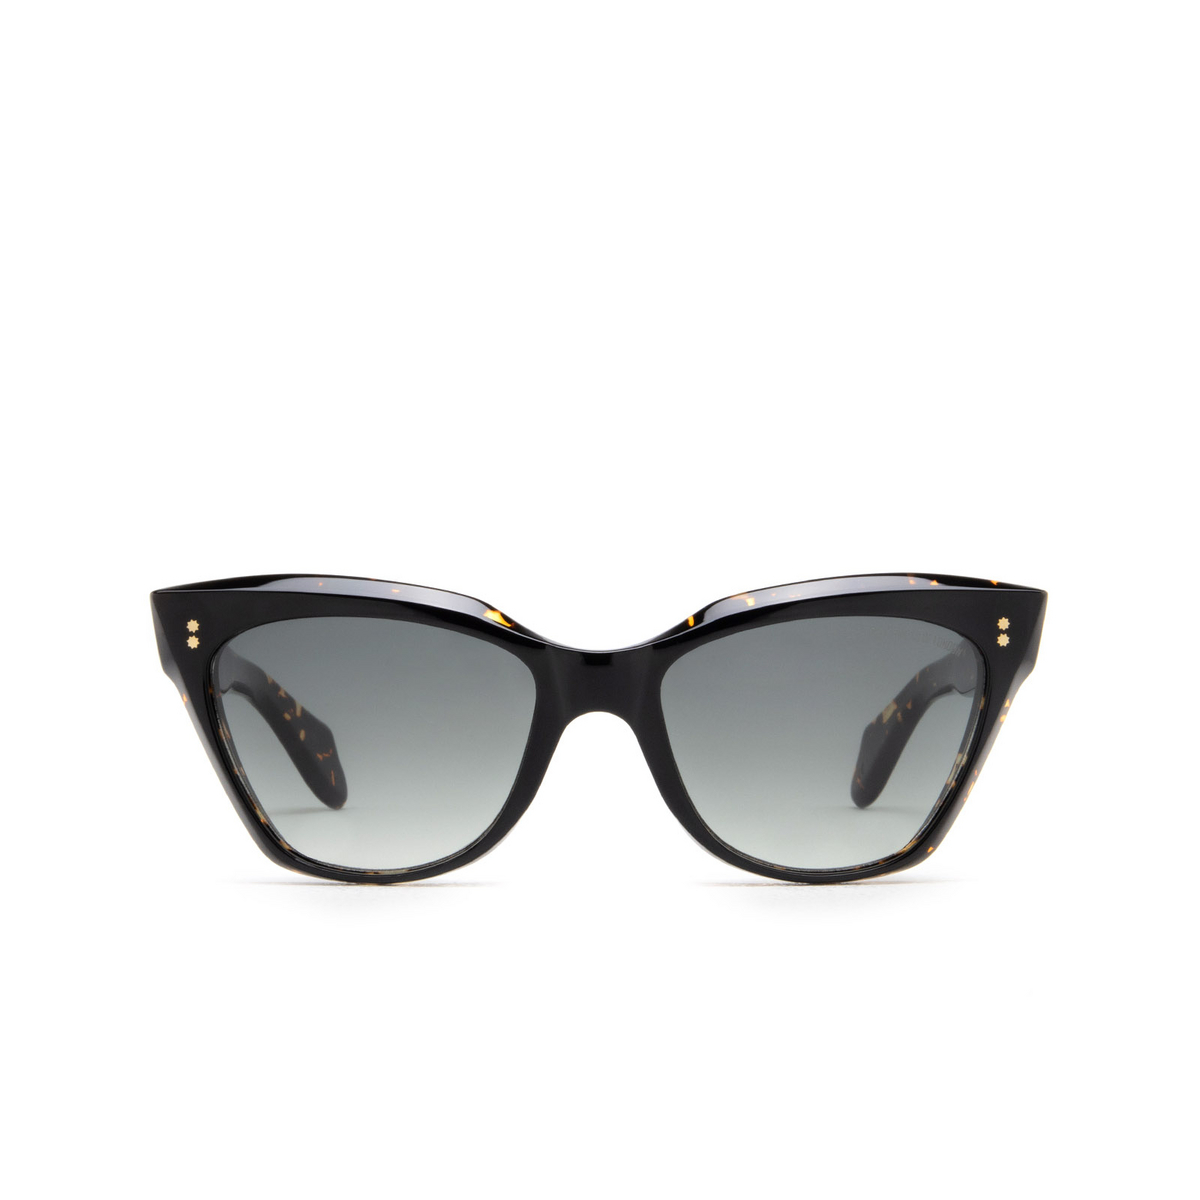 Cutler and Gross 9288 Sunglasses 01 Black On Havana - front view